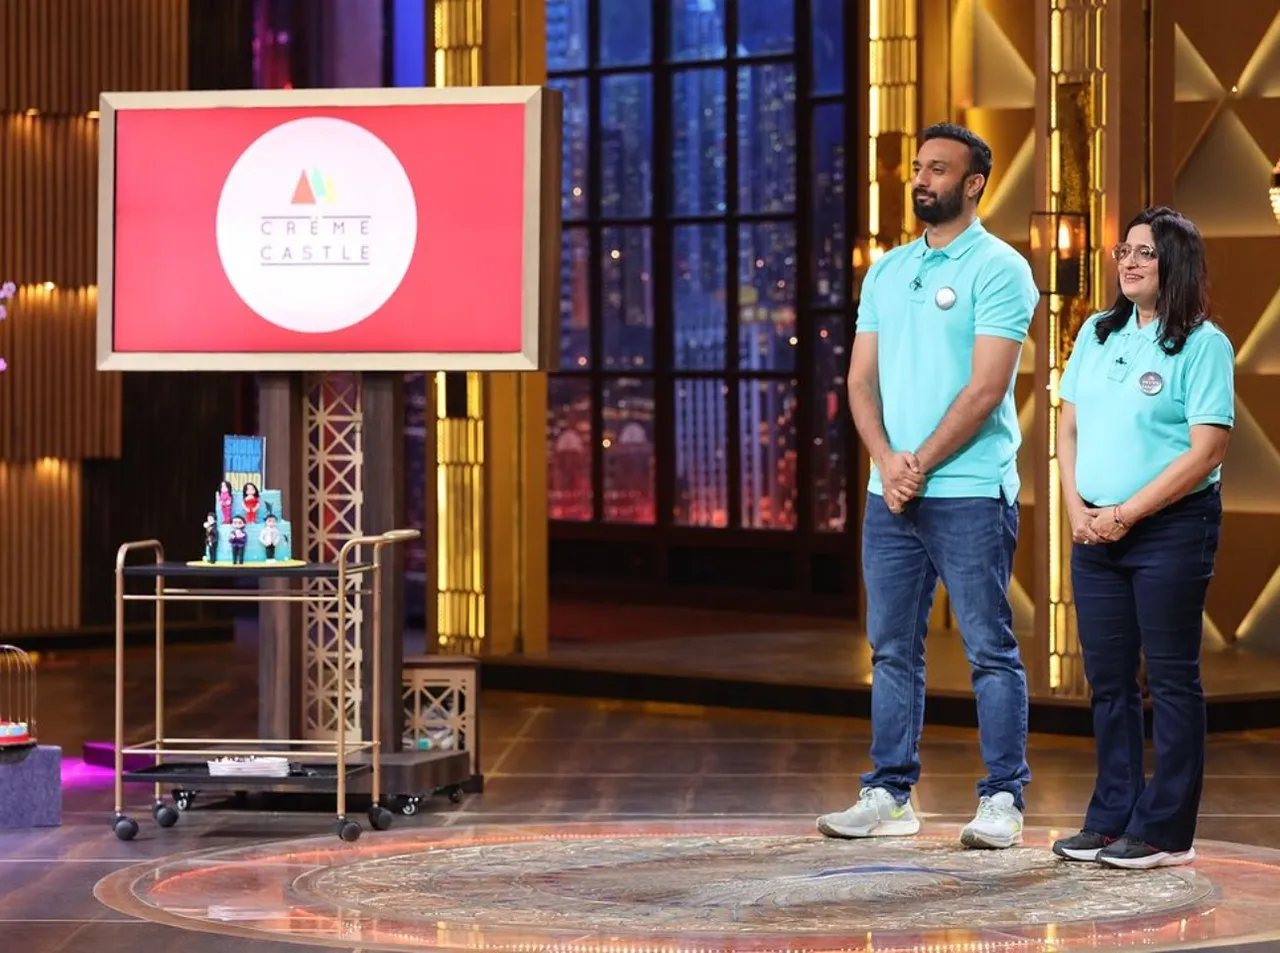 Shark Tank India S3: Creme Castle a Mother and son duo from Gurgaon bags the deal!